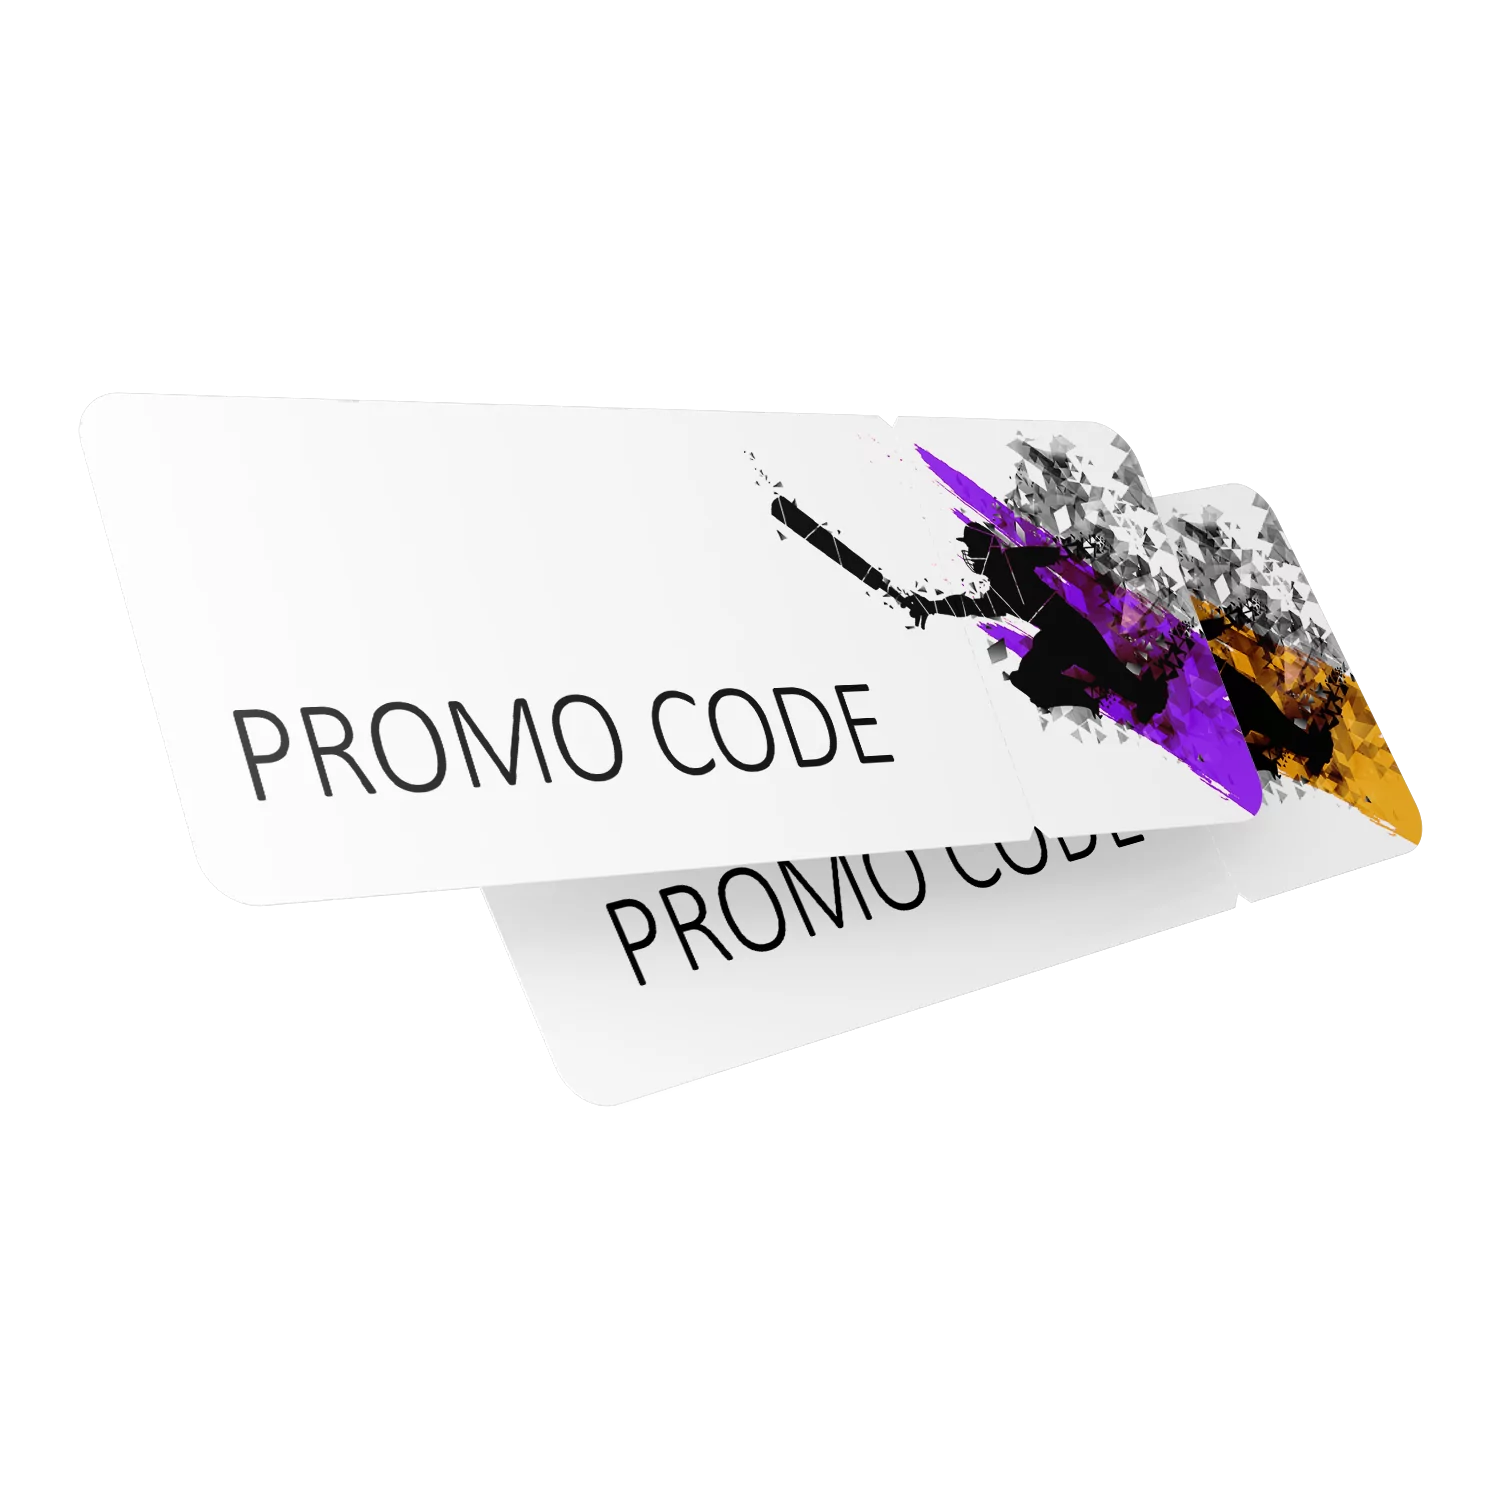 Learn the types of promo codes on betting sites and how to use them.